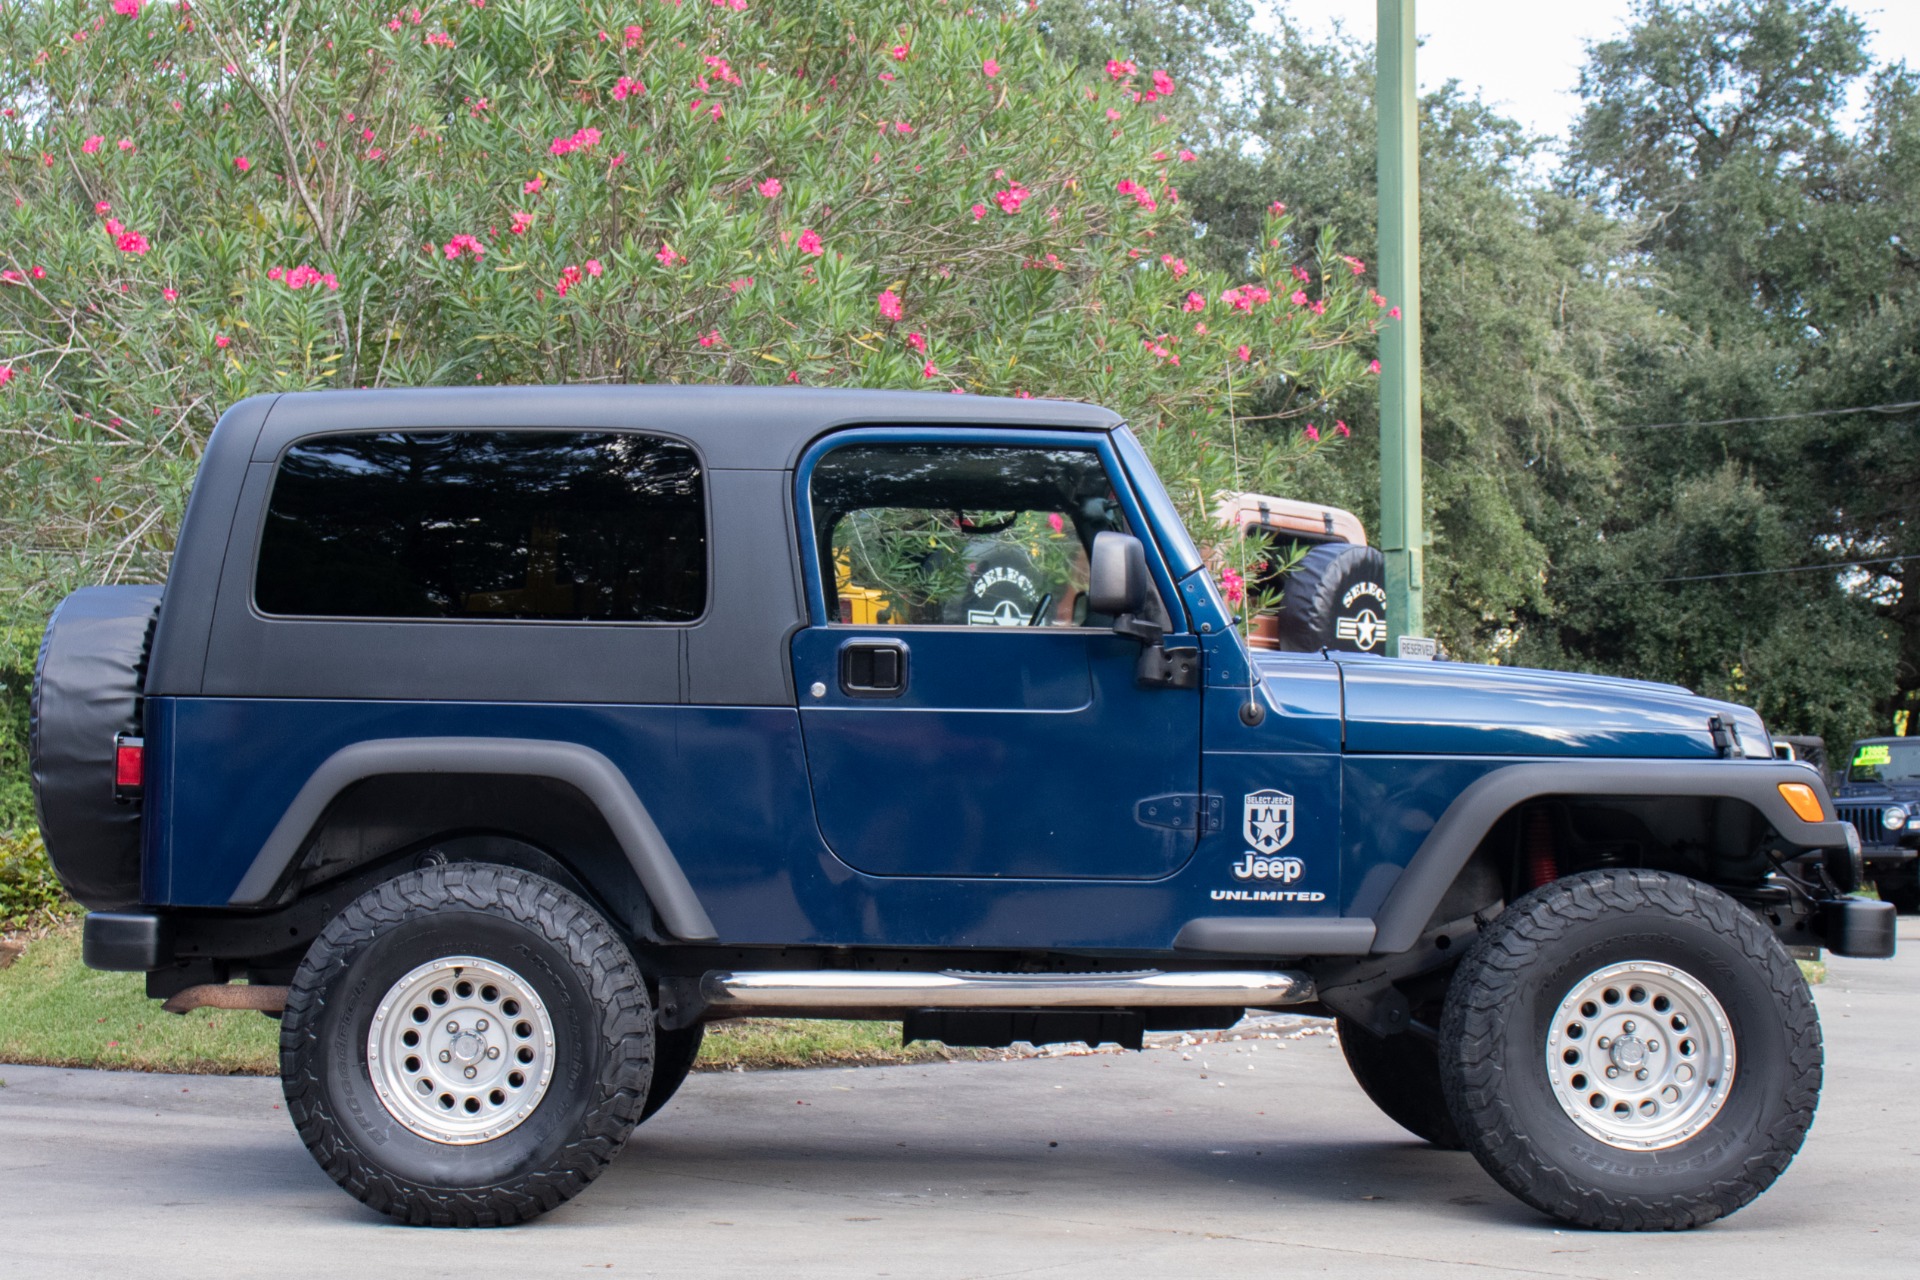 Used 2004 Jeep Wrangler Unlimited For Sale ($16,995) | Select Jeeps Inc.  Stock #793776